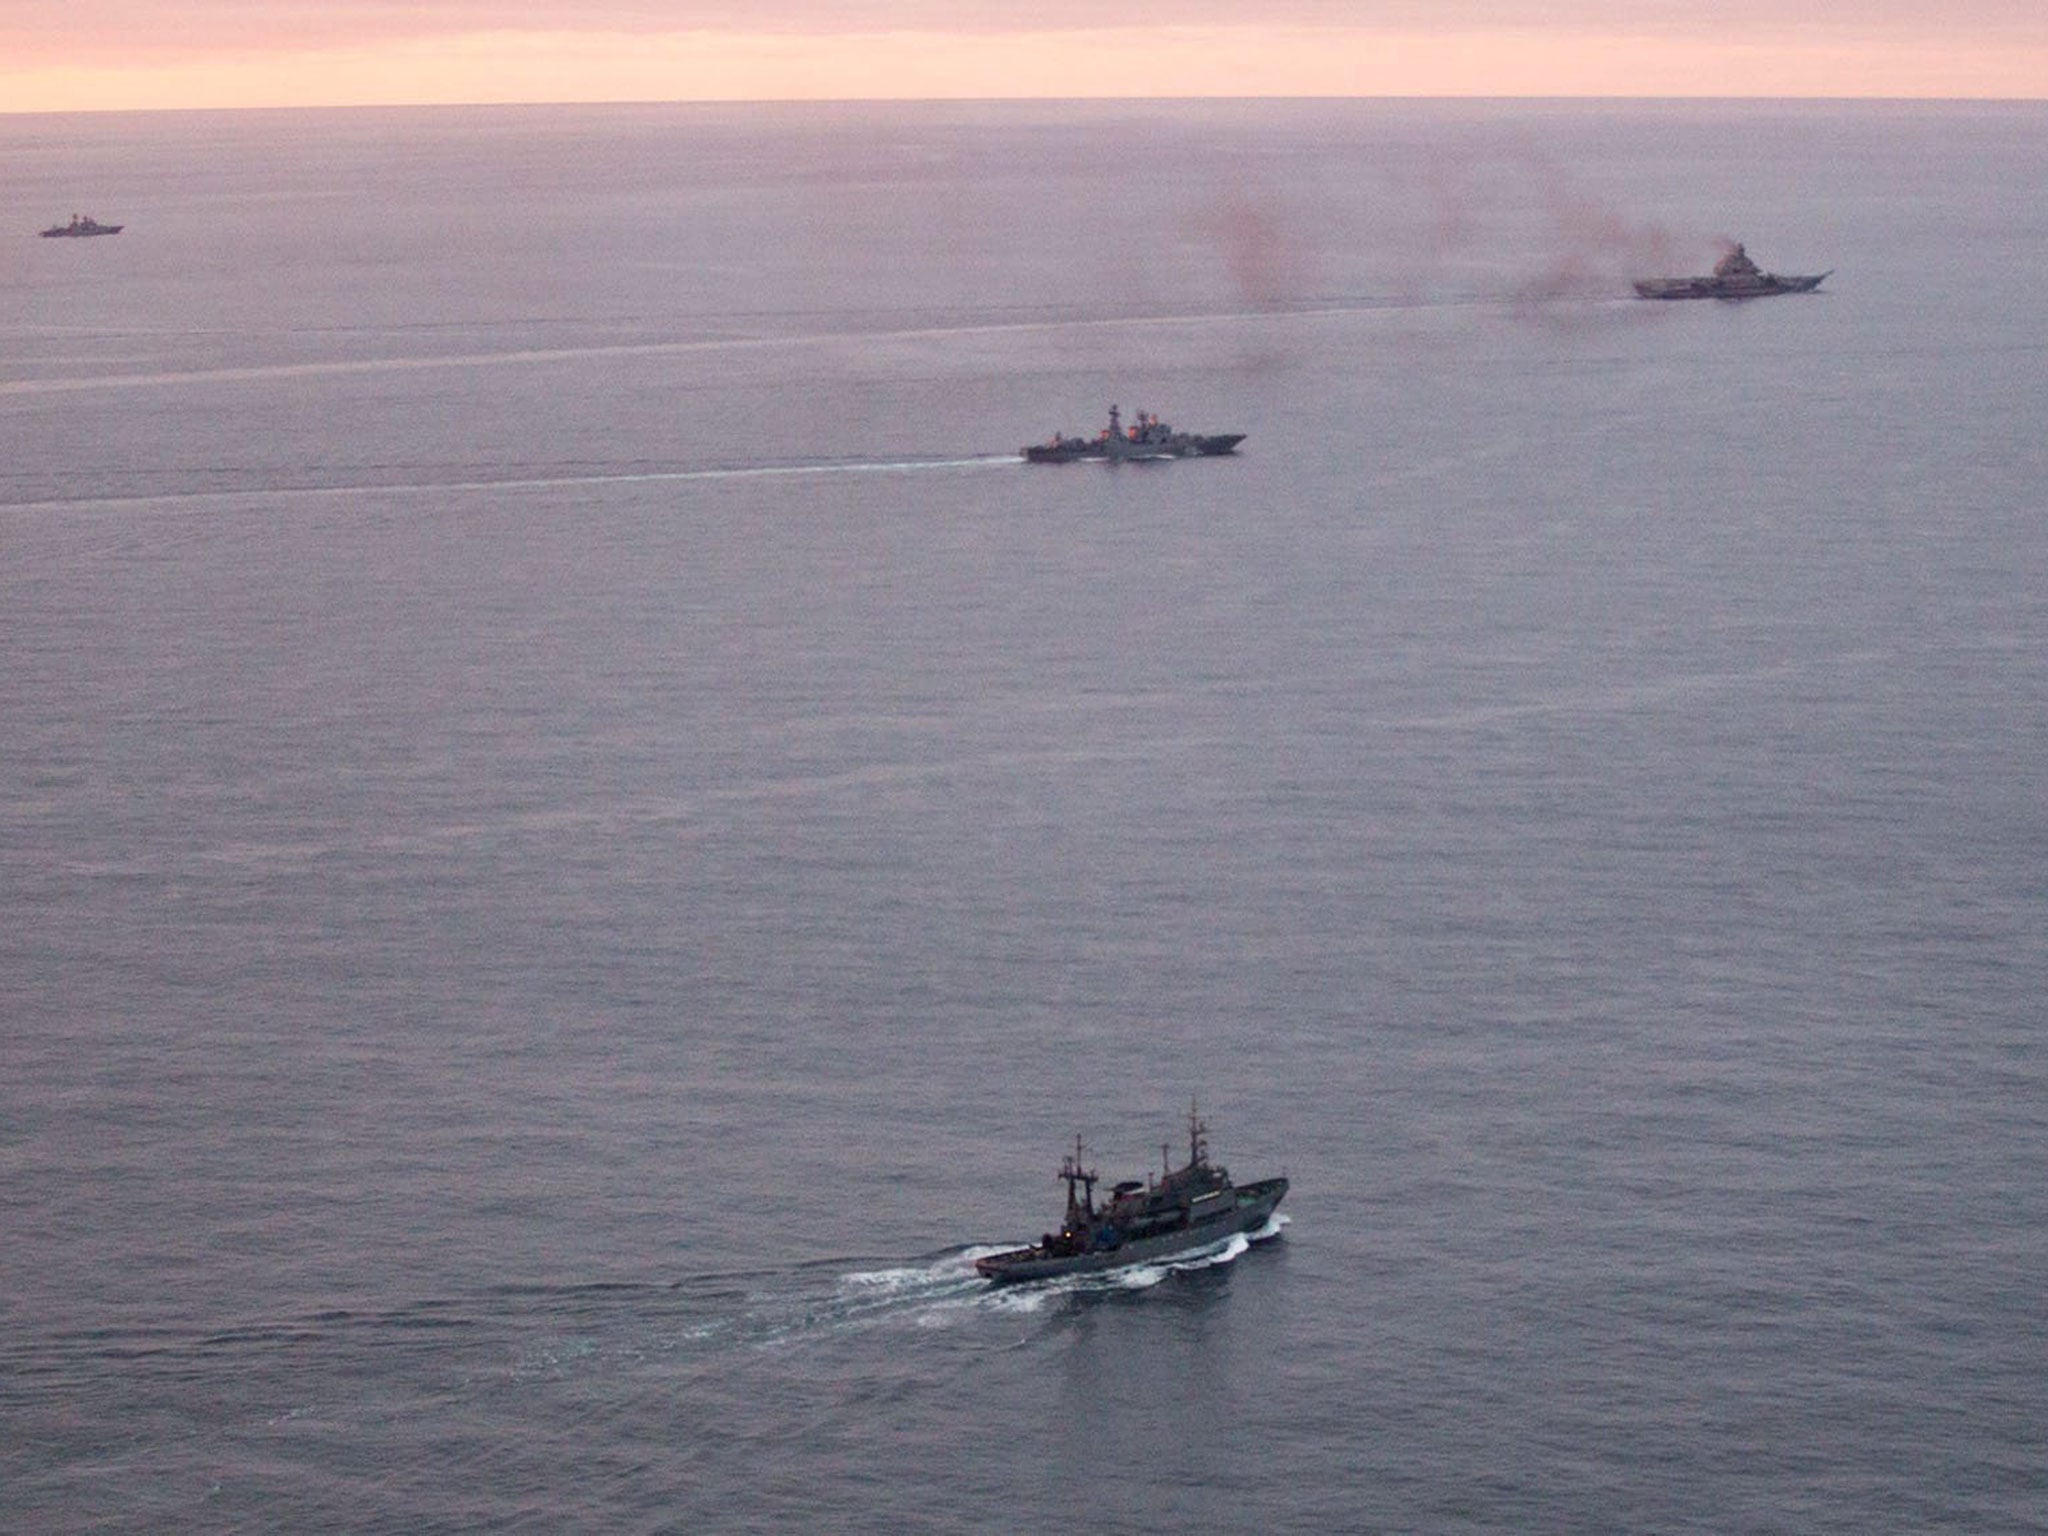 A photo taken from a Norwegian surveillance aircraft shows a group of Russian navy ships in international waters off the coast of Northern Norway on October 17, 2016.